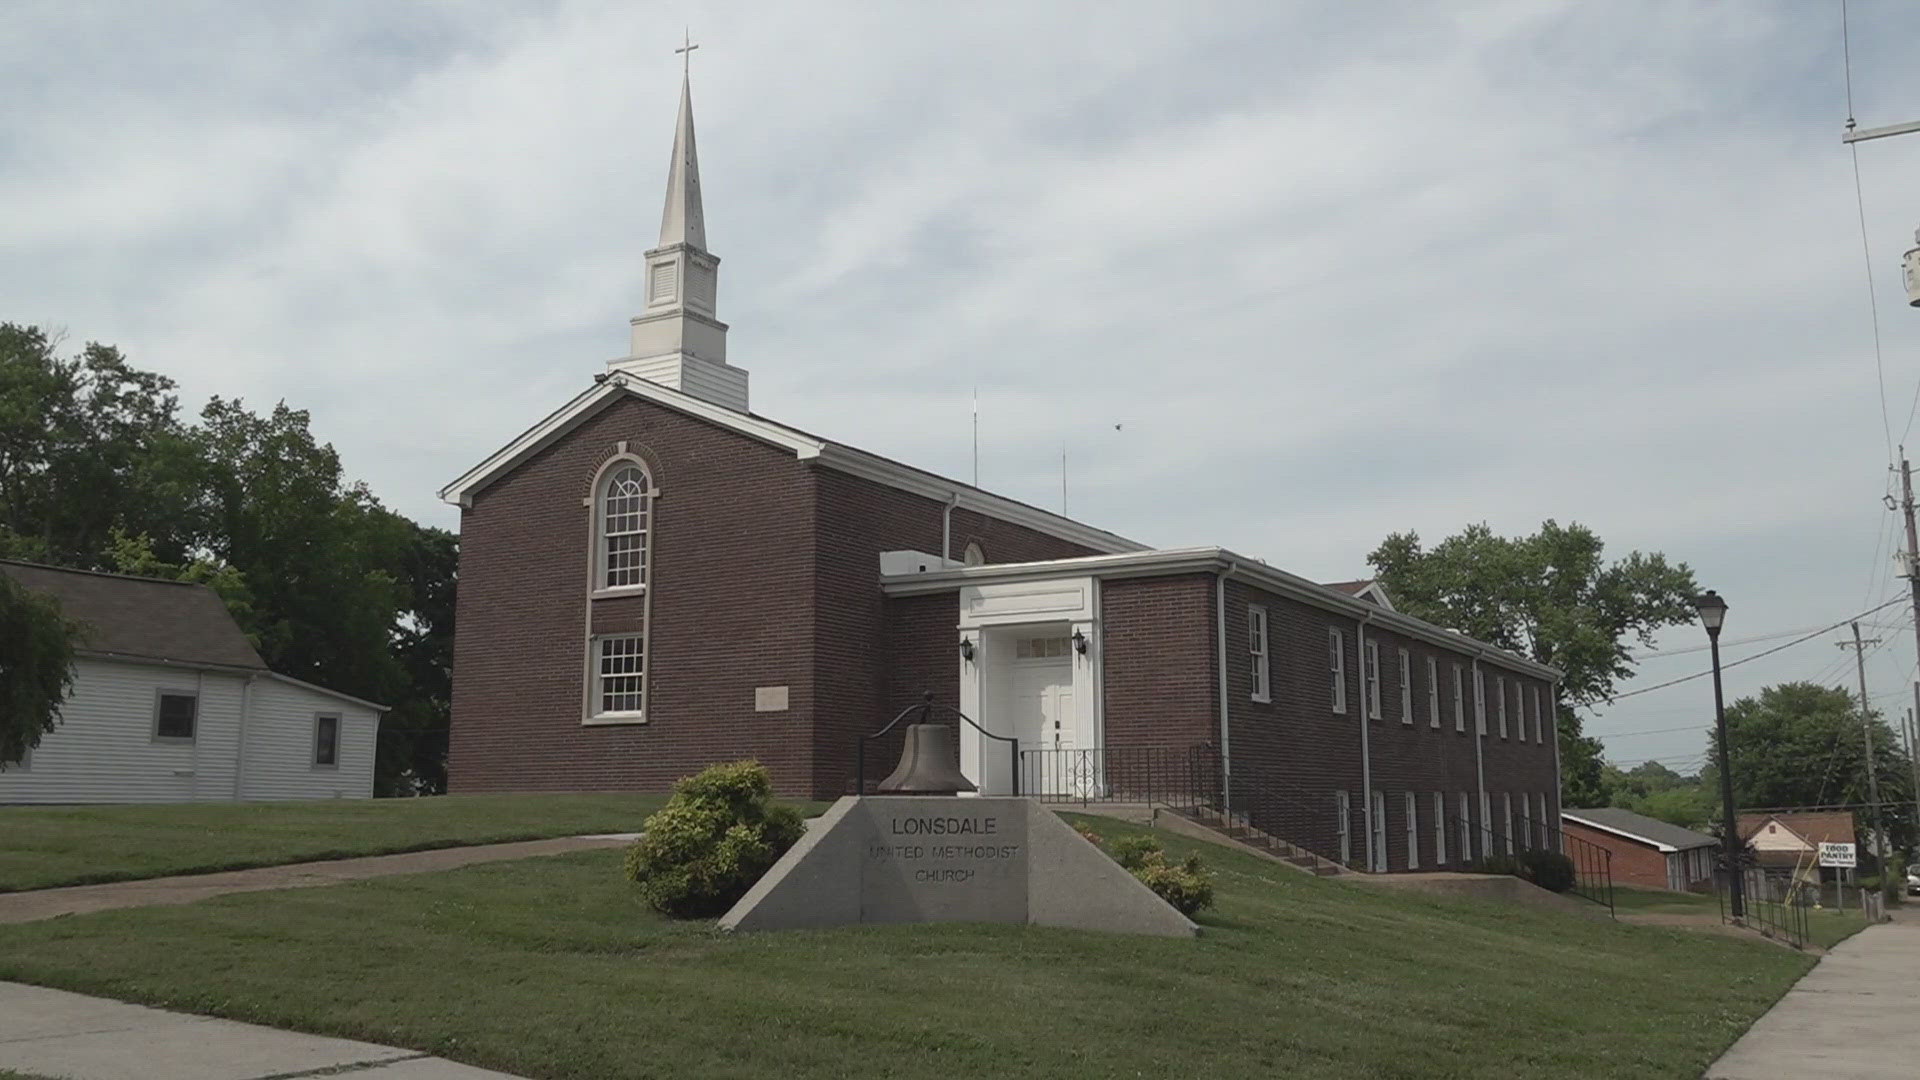 The Lonsdale United Methodist Church was founded in 1899, just nine years after the town.